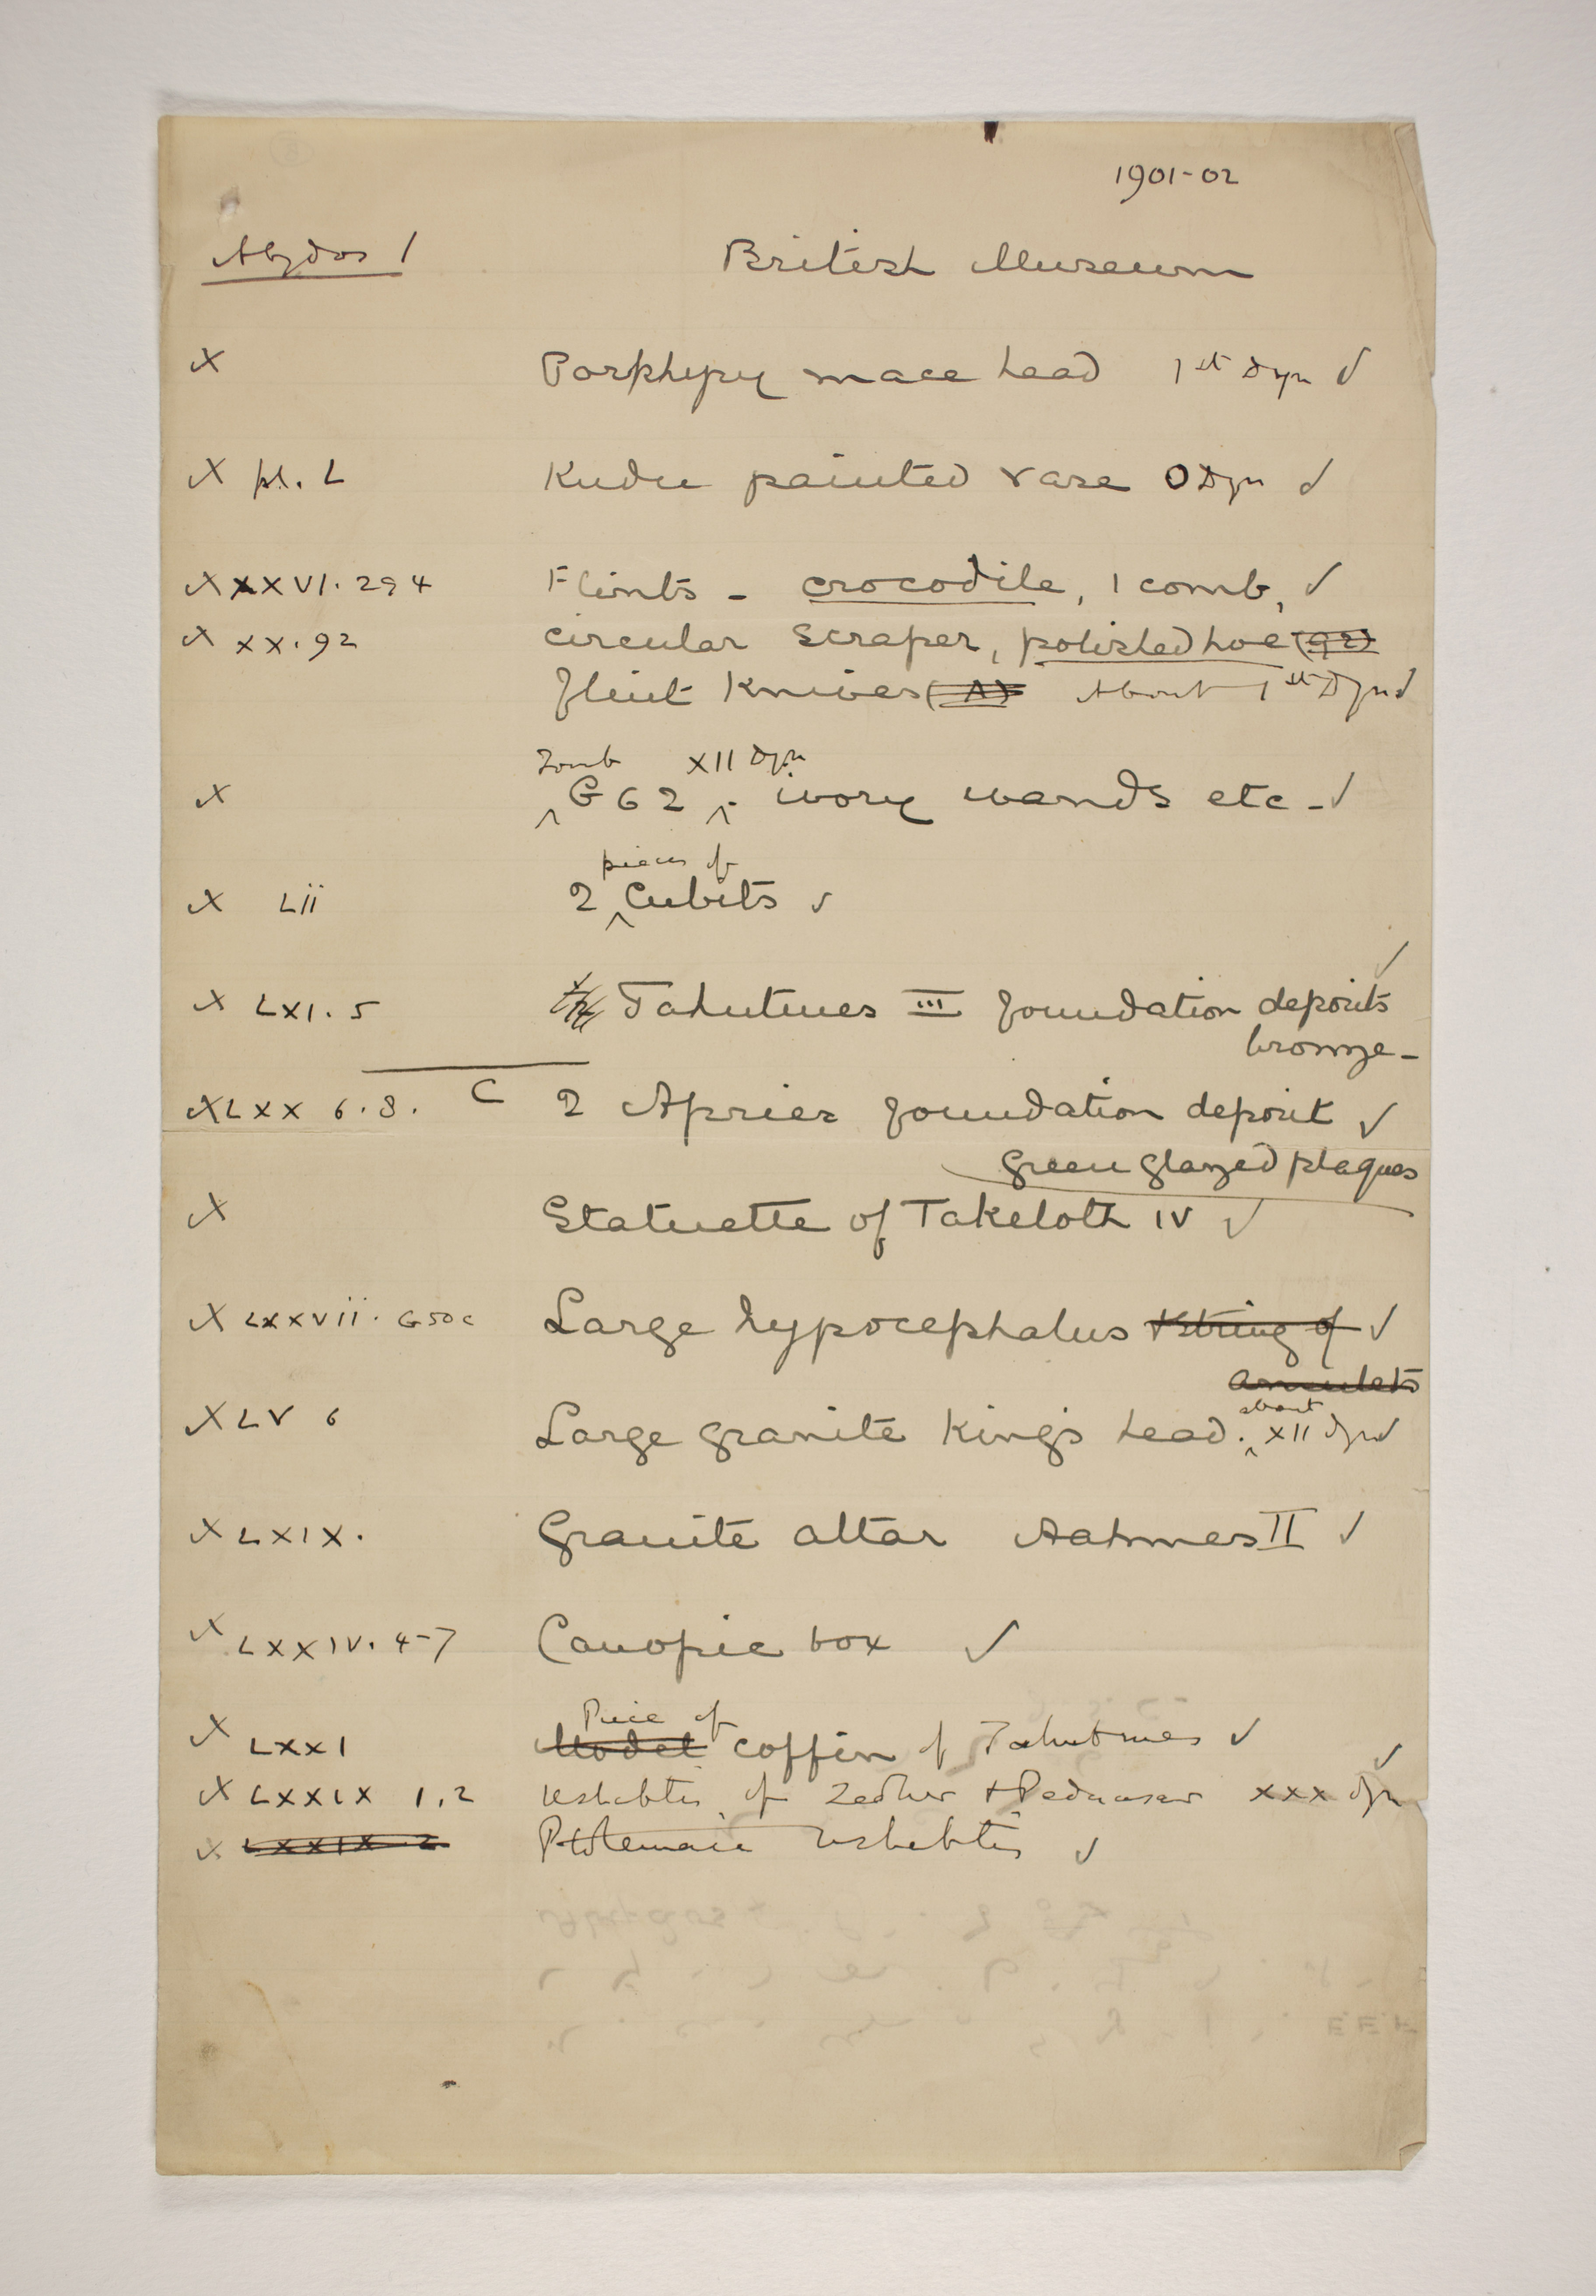 1901-02 Abydos Individual institution list  PMA/WFP1/D/10/5.1